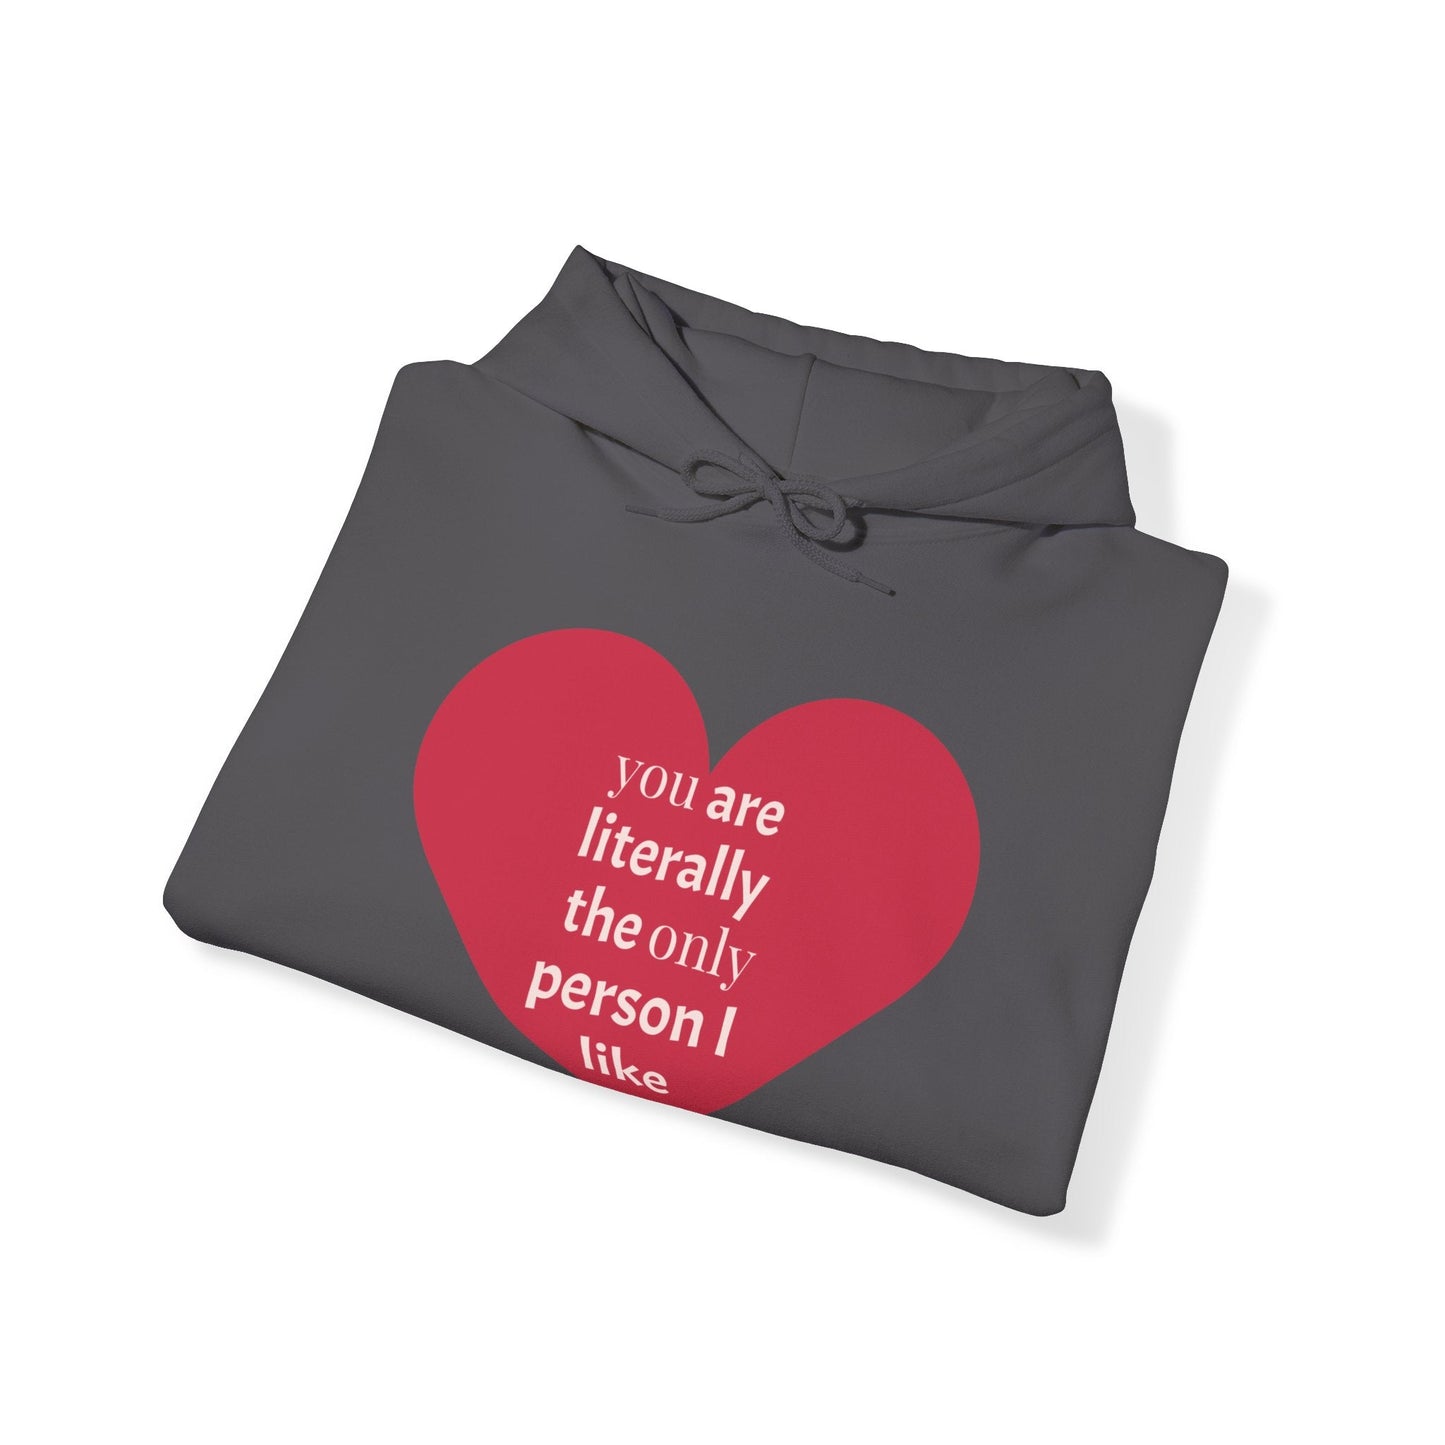 Valentine’s Day Heart Gift Unisex Heavy Blend™ Hooded Sweatshirt - you are literally the only person i can stand - Lizard Vigilante